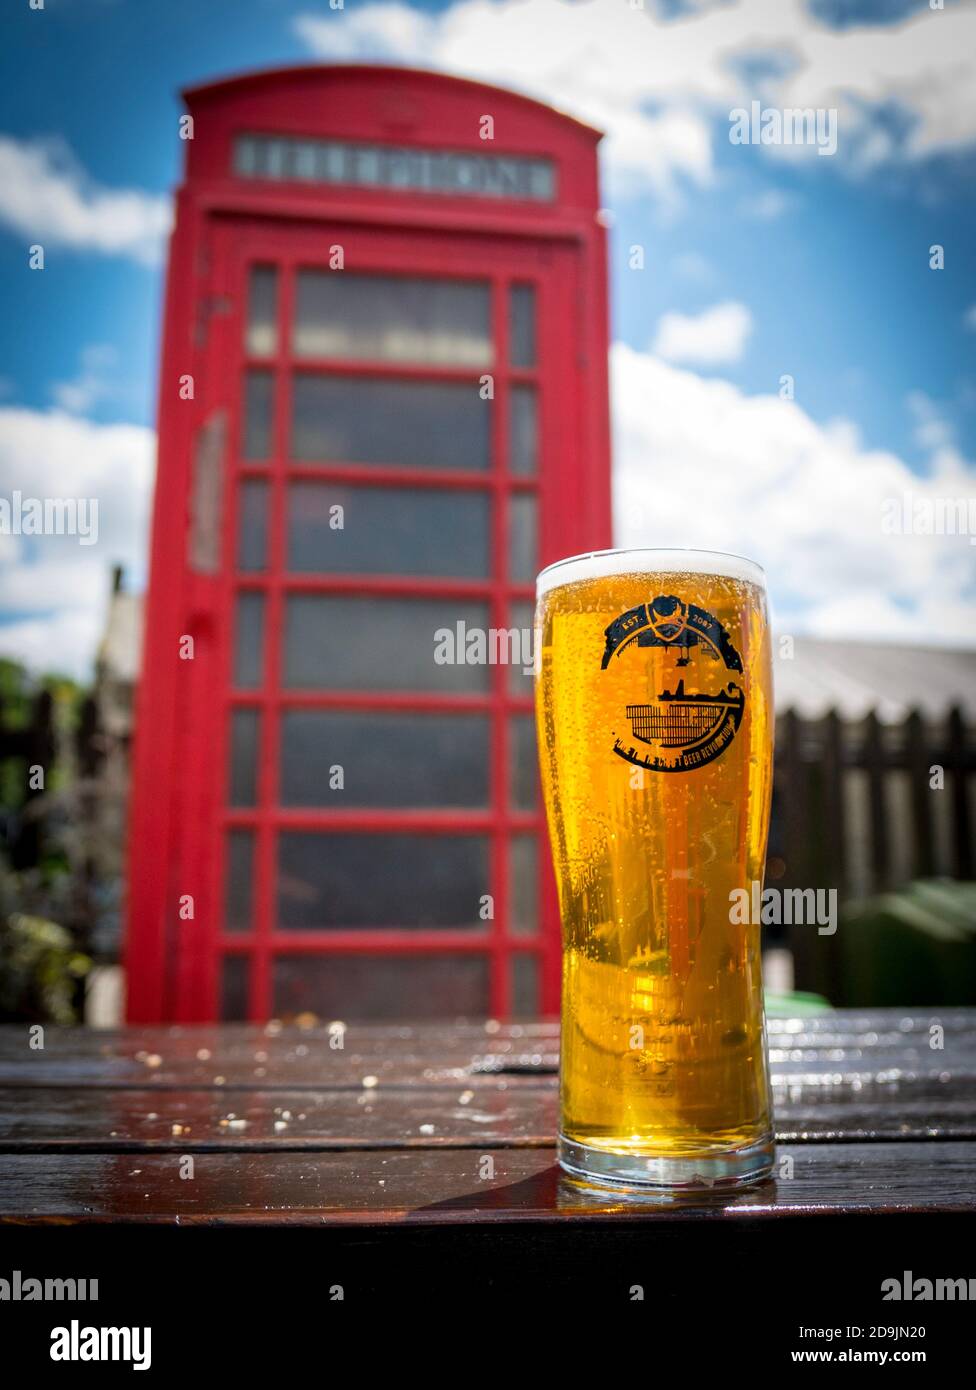 Pint of Punk IPA beer with phone box Stock Photo